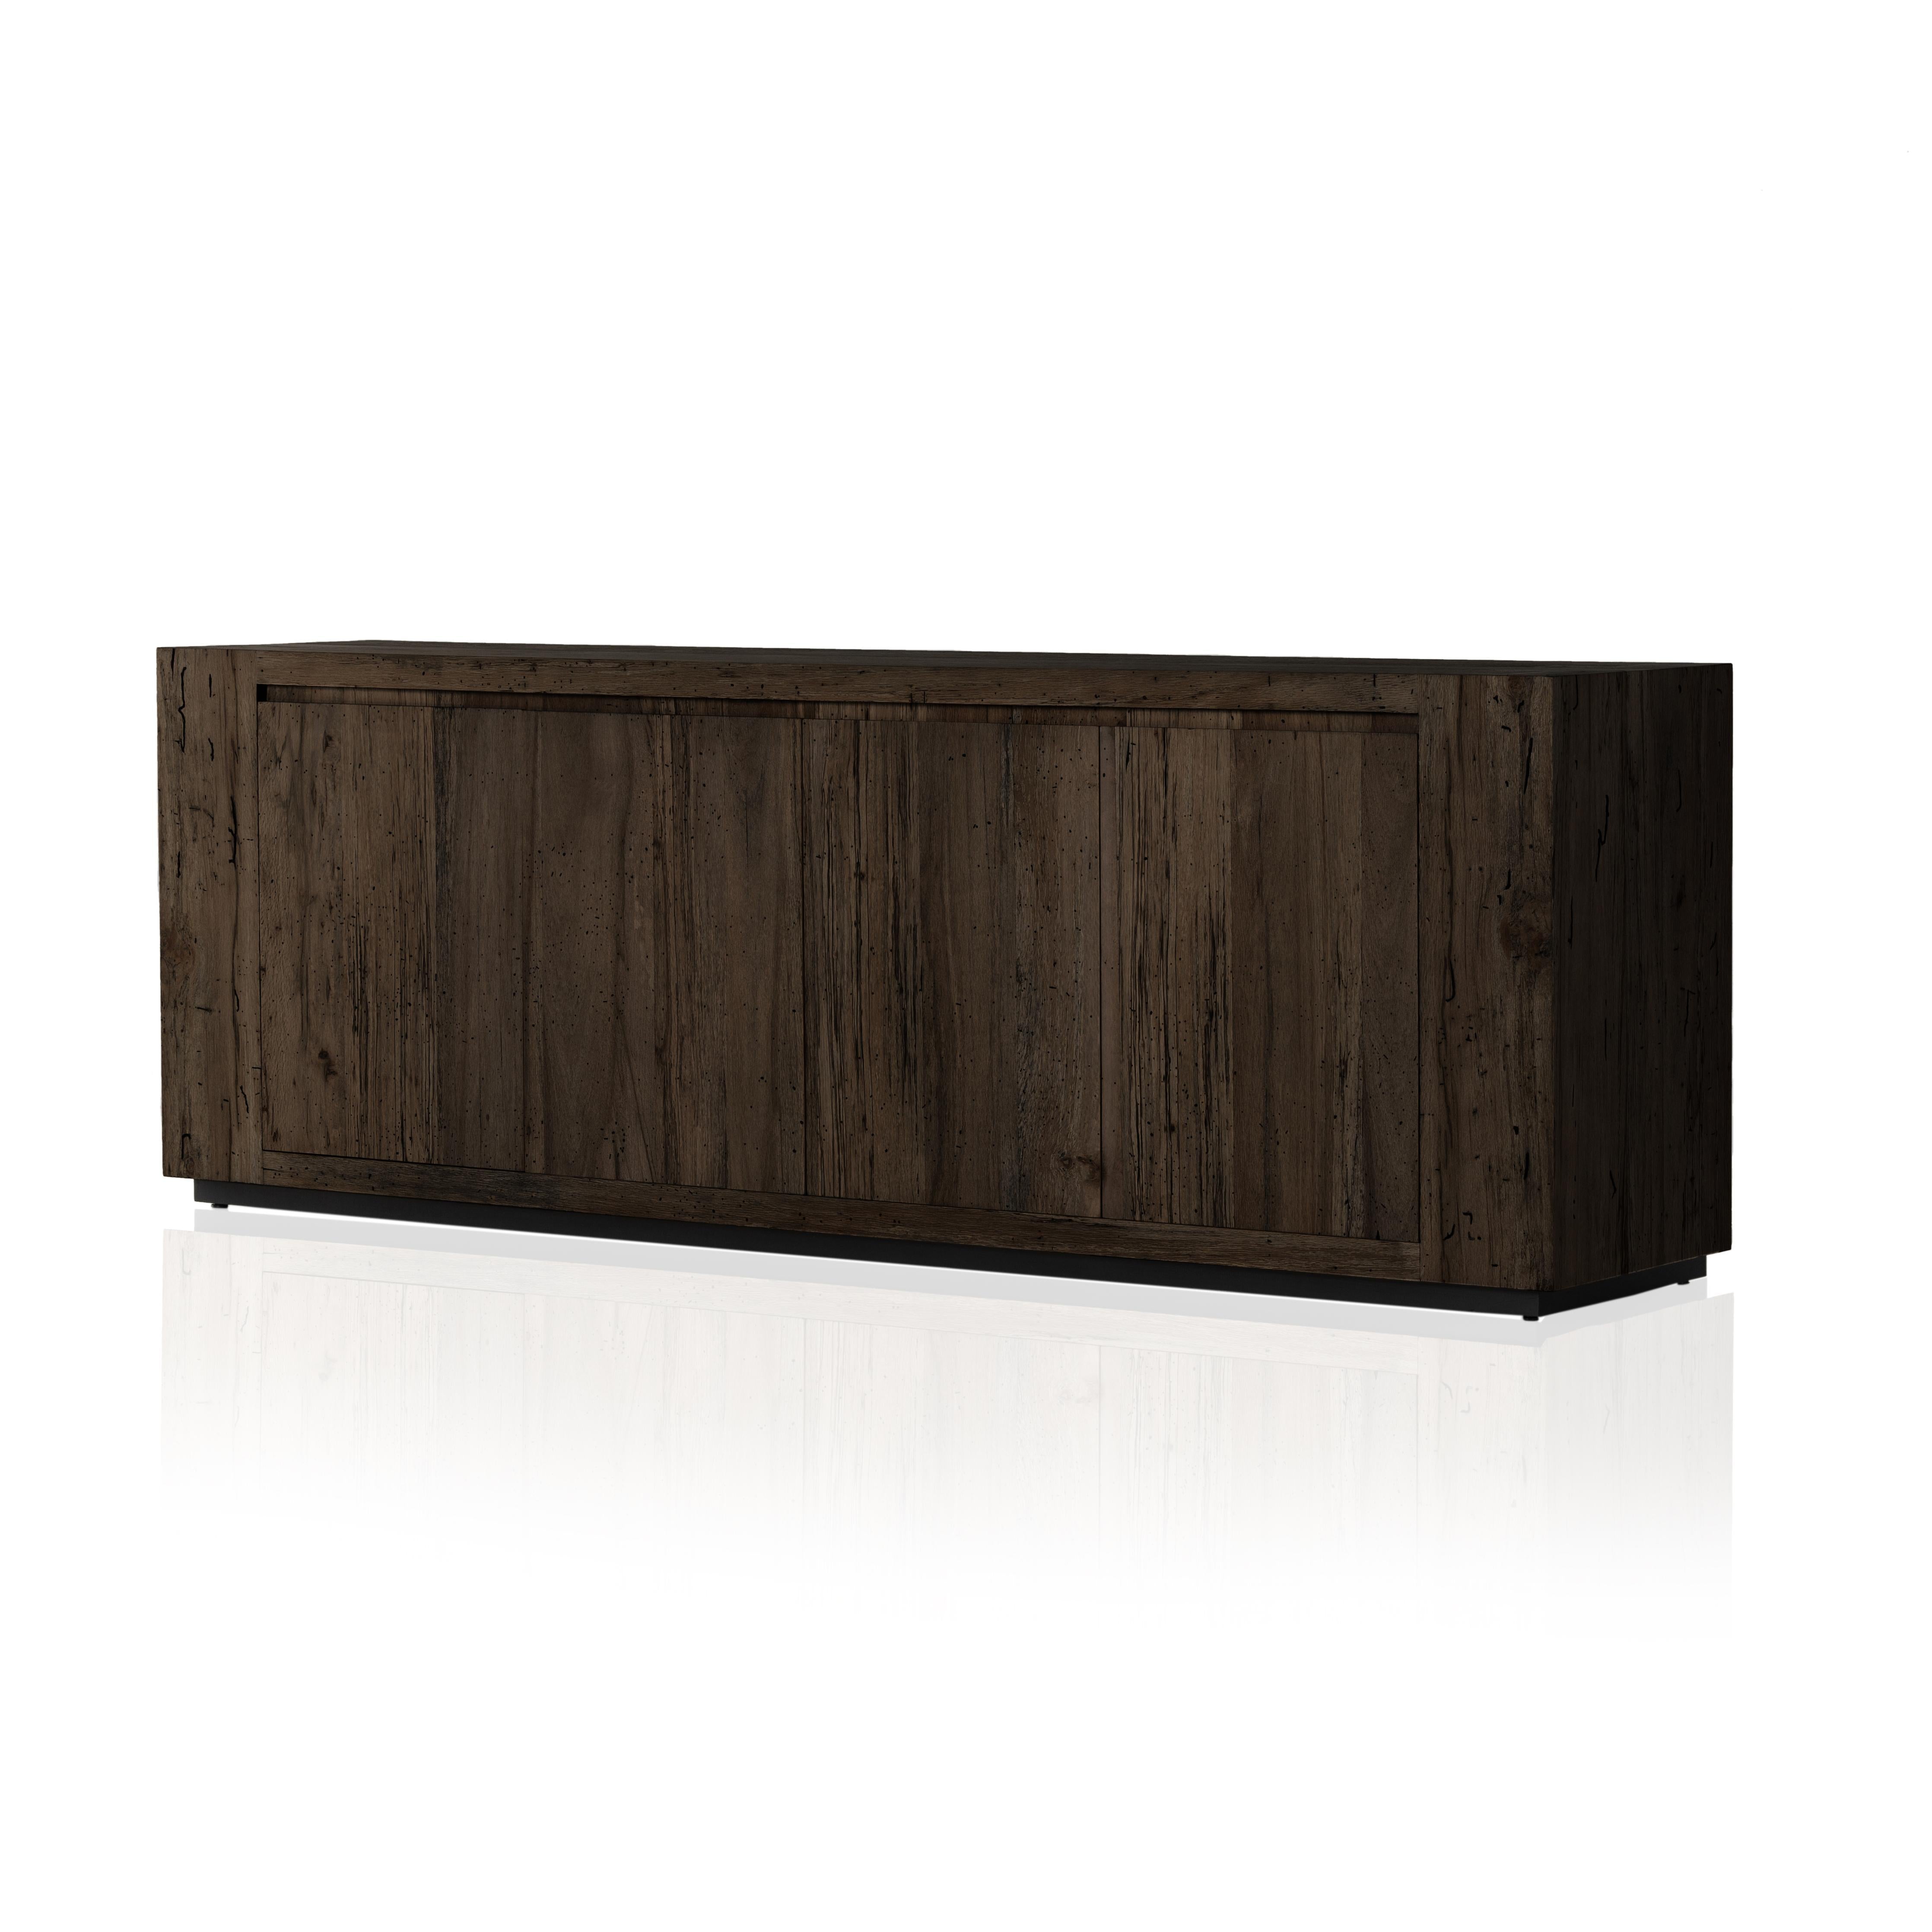 Made from thick-cut oak veneer with a faux rustic finish made to emulate wormwood, this low, large-scale sideboard features chunky squared legs and dovetail joinery detailing. Amethyst Home provides interior design, new home construction design consulting, vintage area rugs, and lighting in the Salt Lake City metro area.